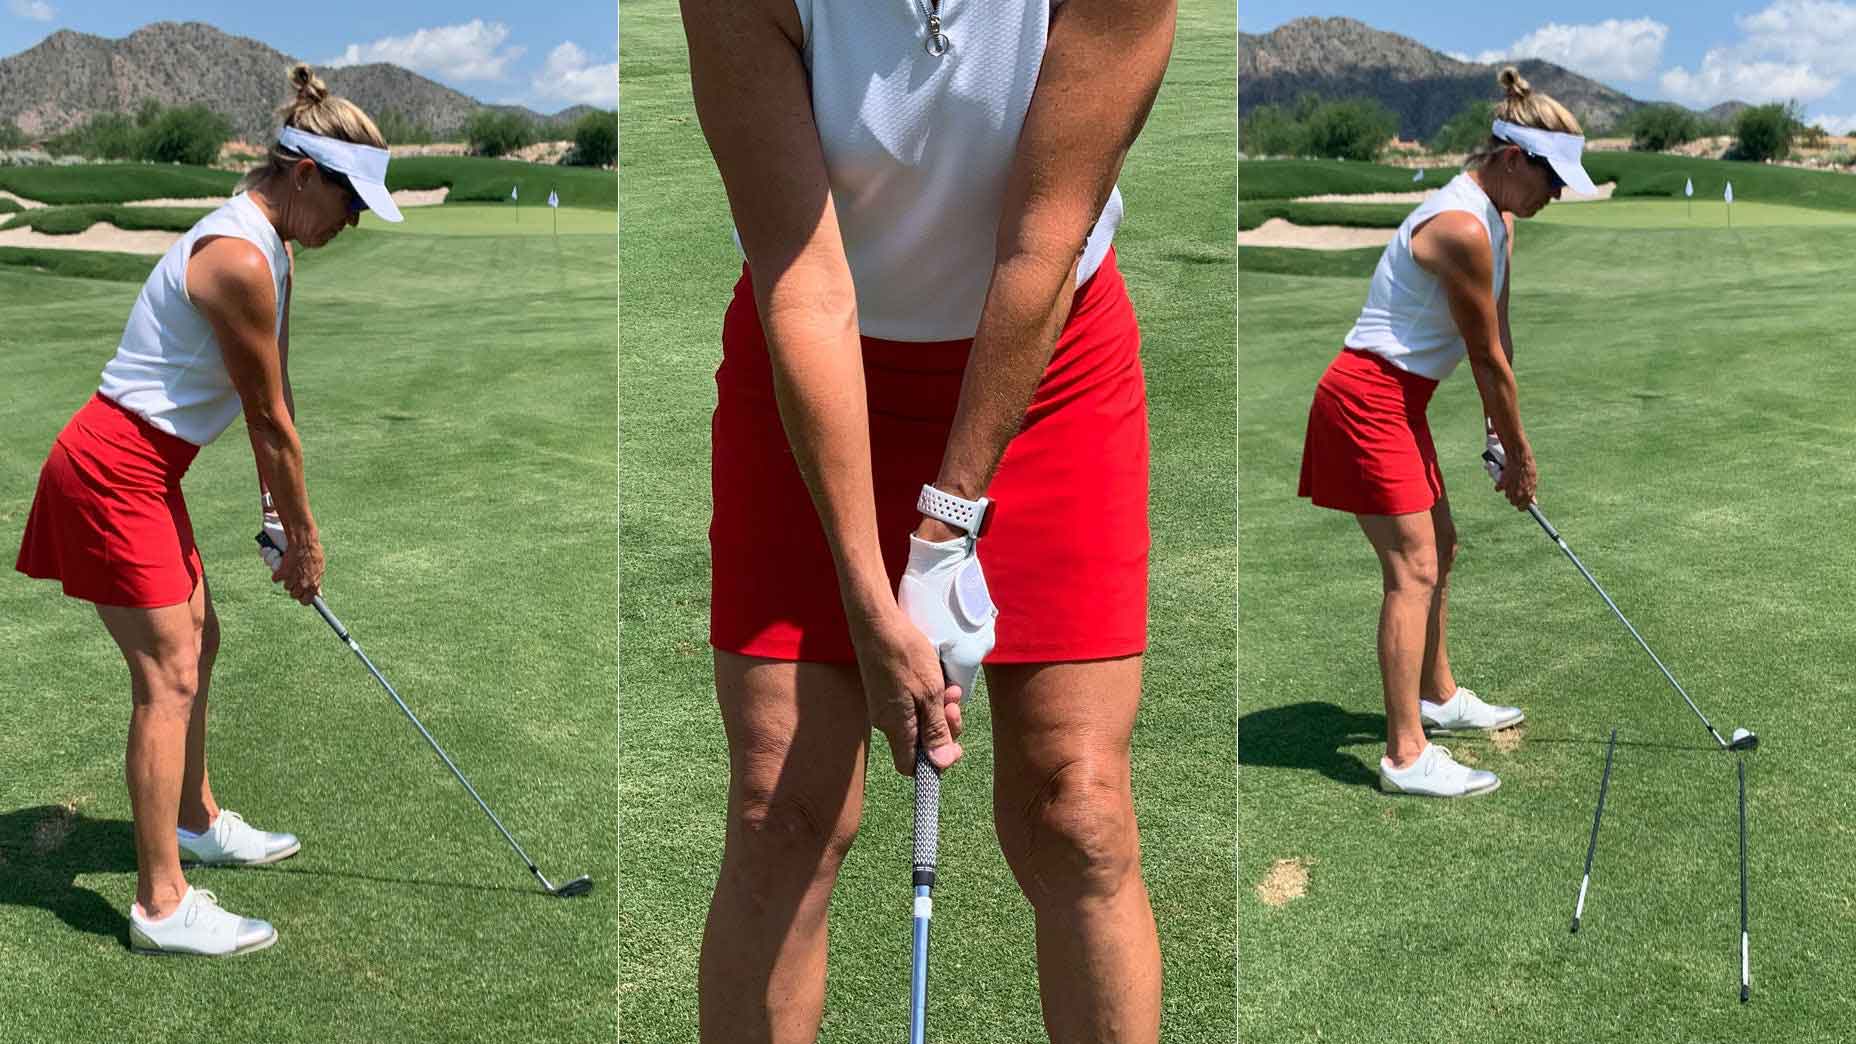 Women's golf tips: Why posture is the key to a successful golf swing